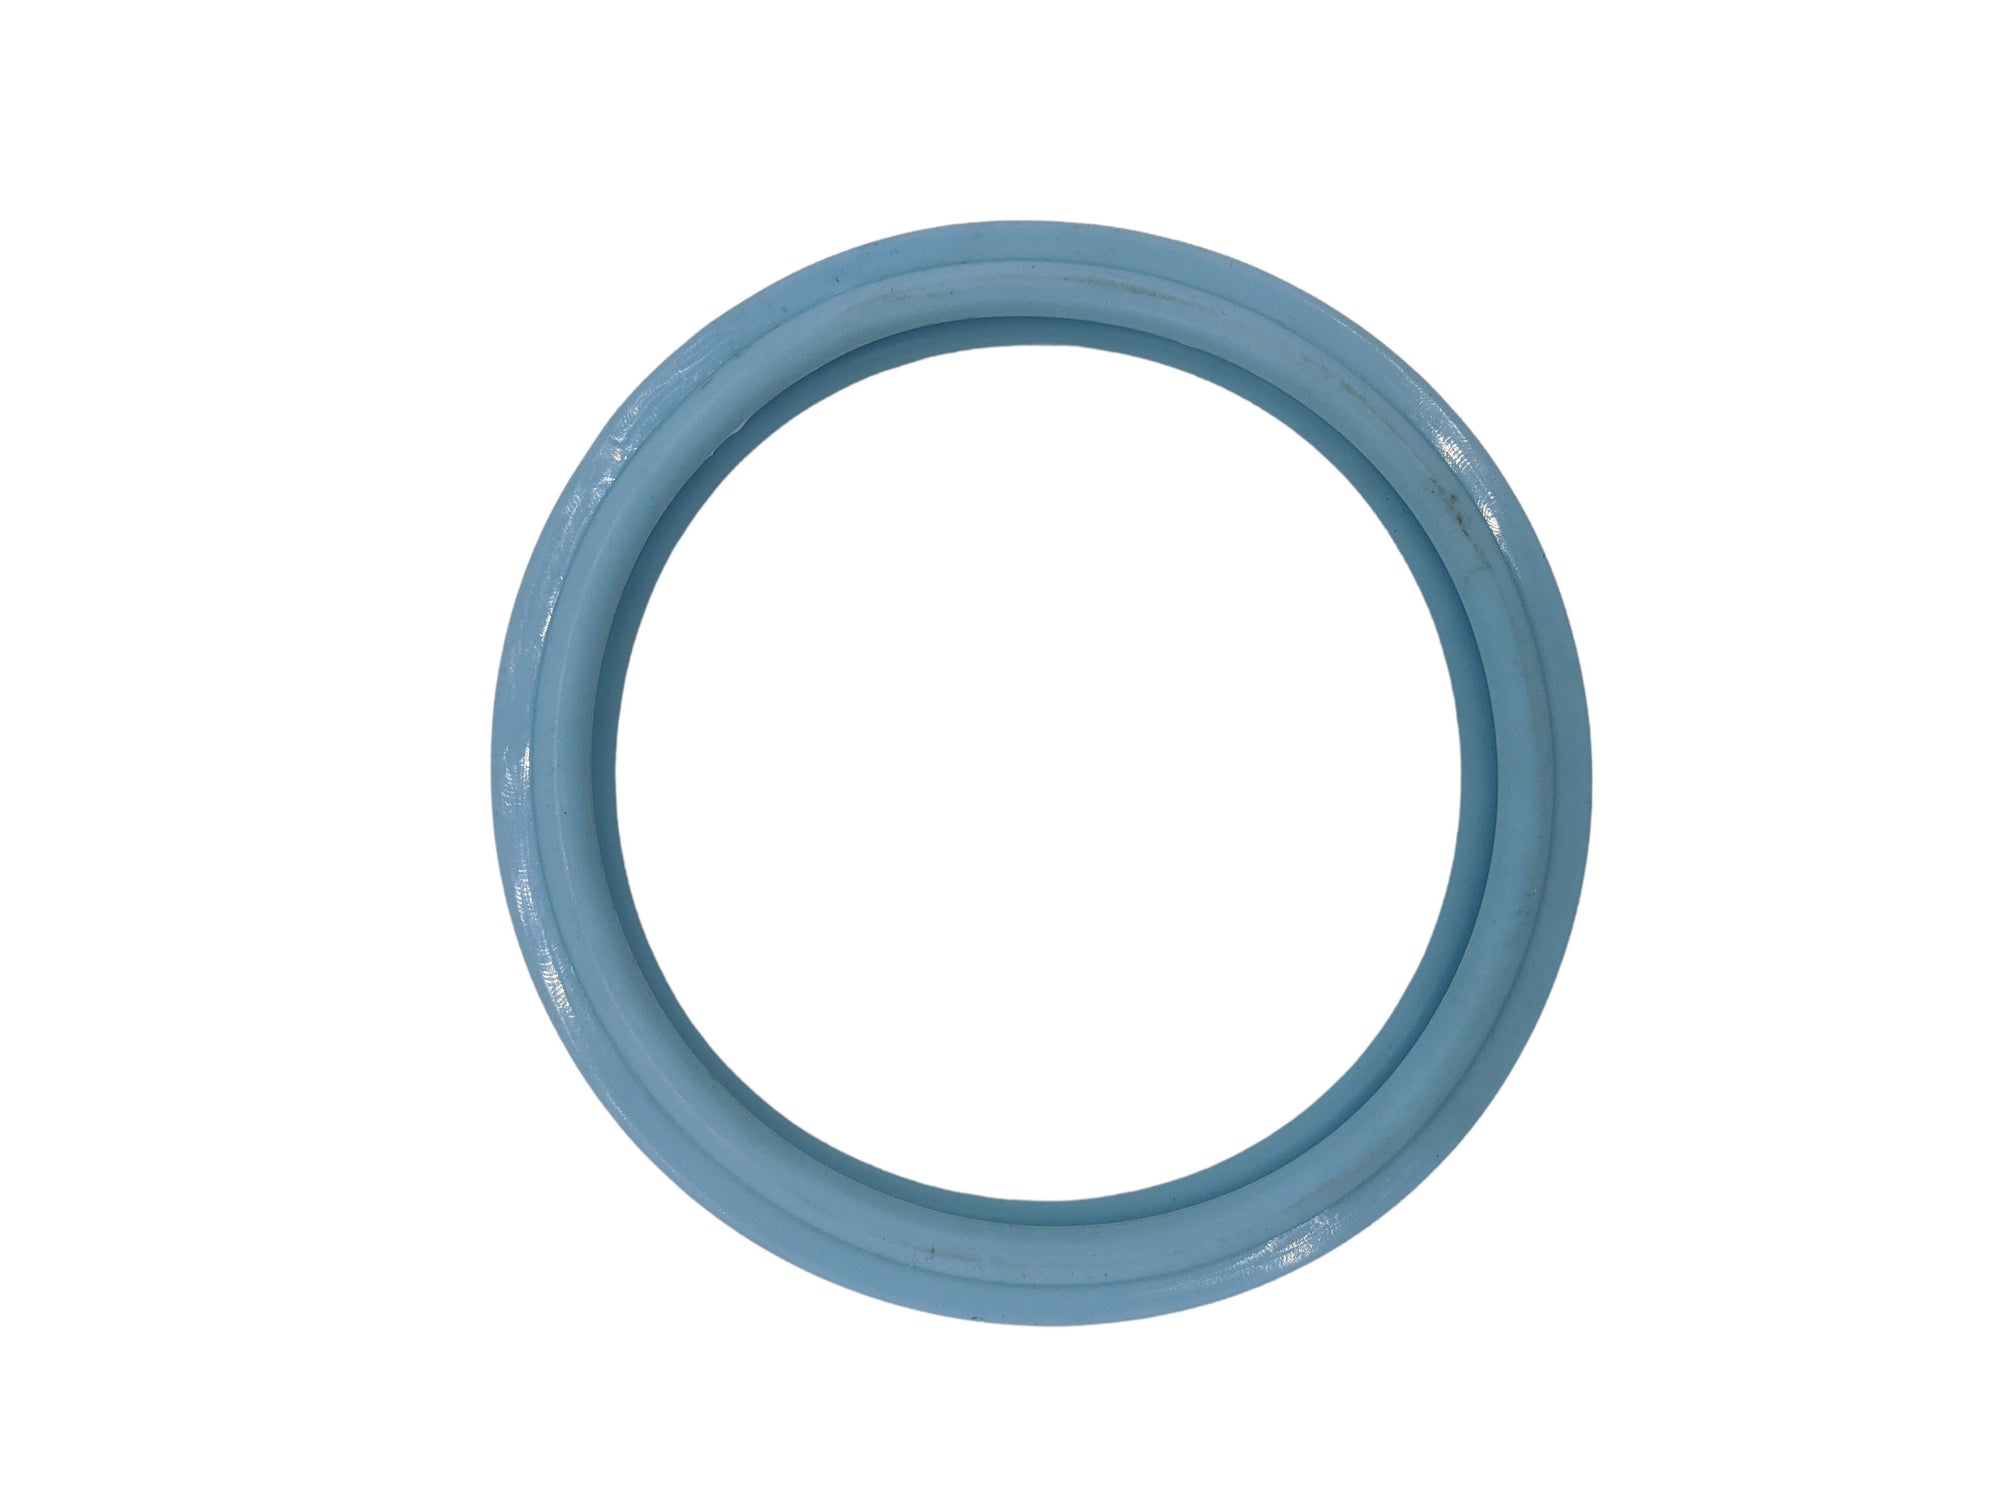 Pentair 79108600 4-Inch White Silicone Gasket Replacement AquaLight Pool and Spa Light Home & Garden > Pool & Spa Pentair 